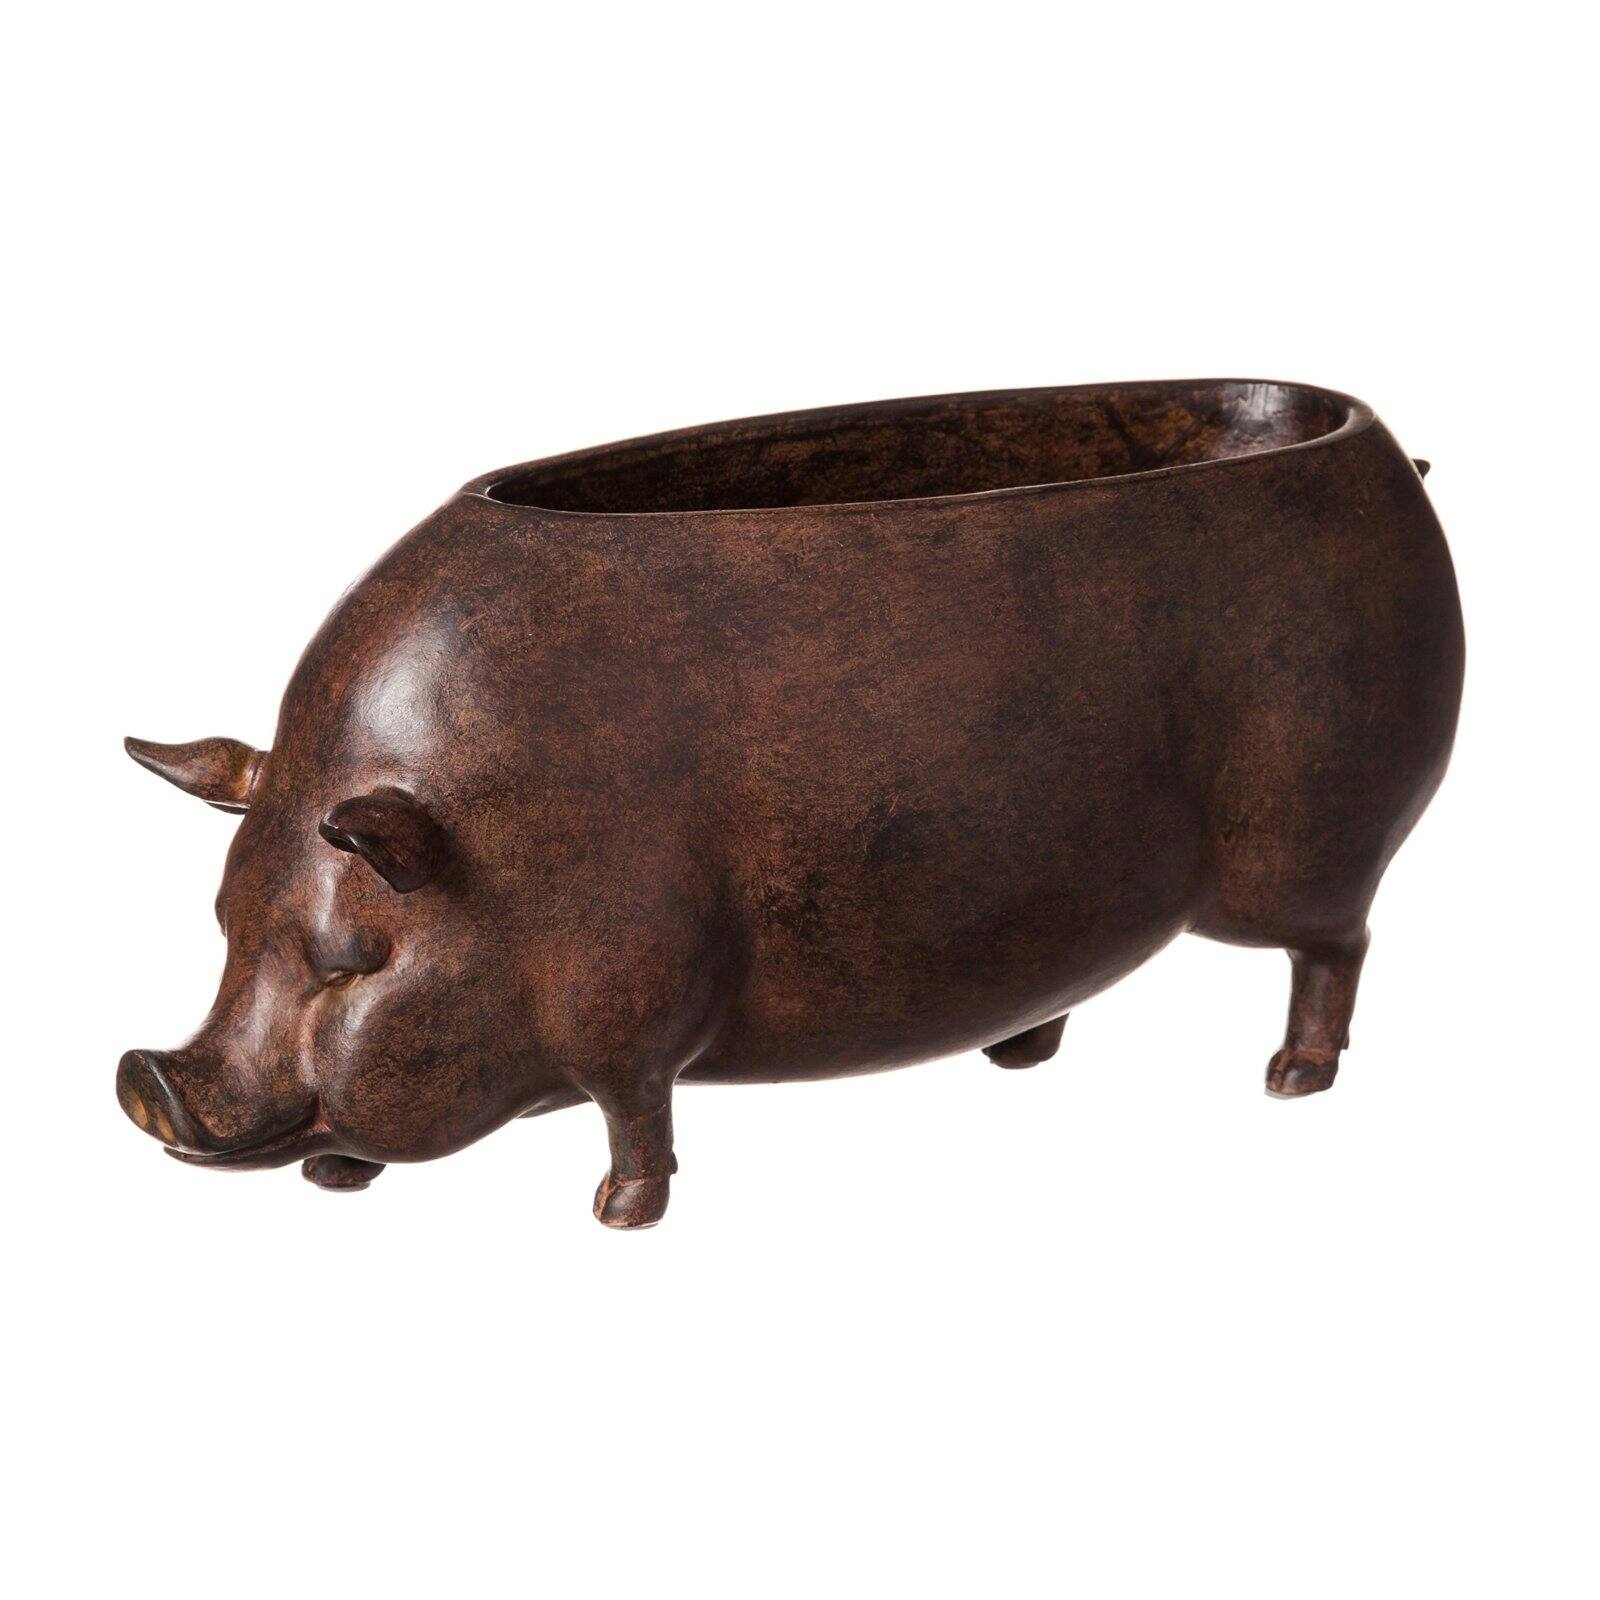 Evergreen Beautiful Springtime Classic Resin Pig Shaped Statue and Planter - 14x5x6 in - image 1 of 2